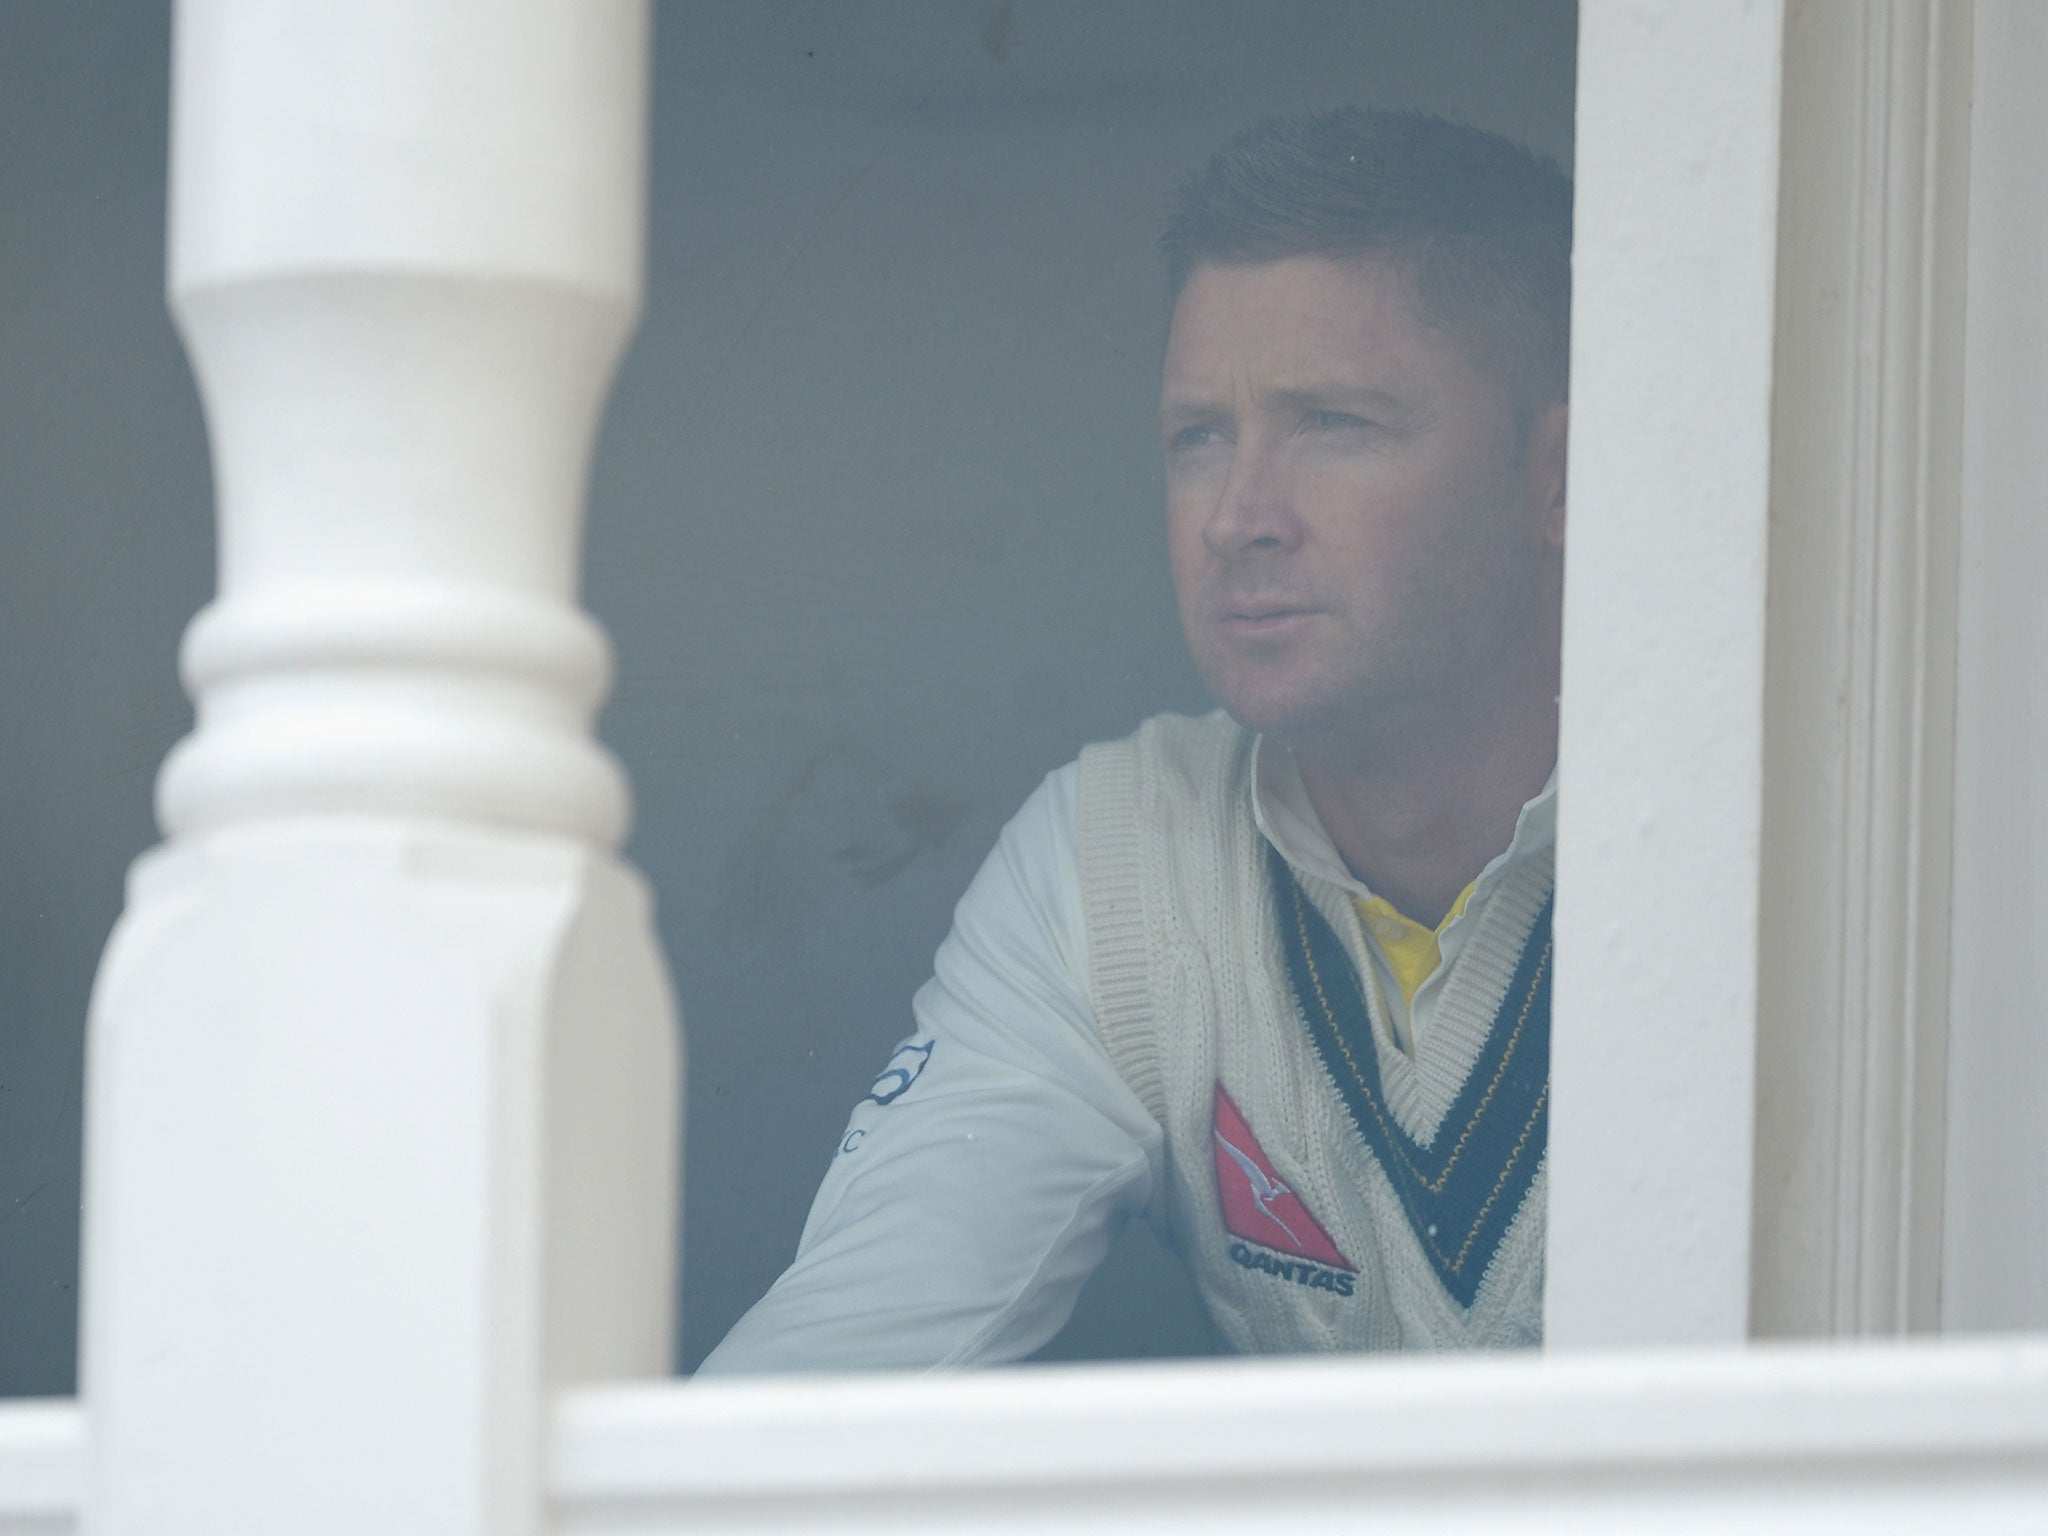 Australian captain Michael Clarke watches his team from the dressing room